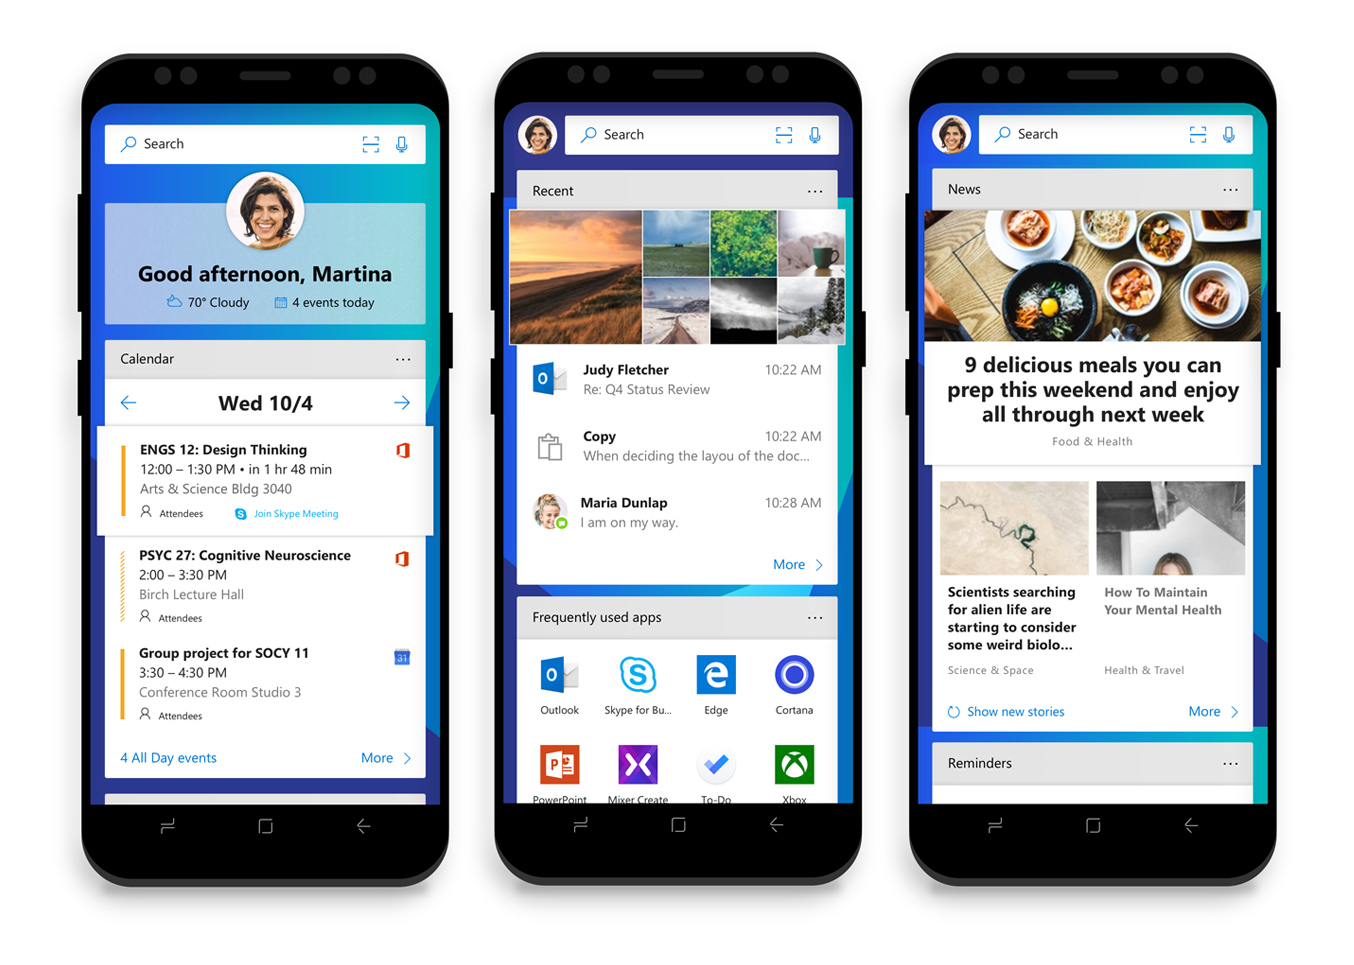 Windows 10 Tip: Timeline for Android phone via Microsoft Launcher app 8268874d2e645d4bb0948d74441562cd.png